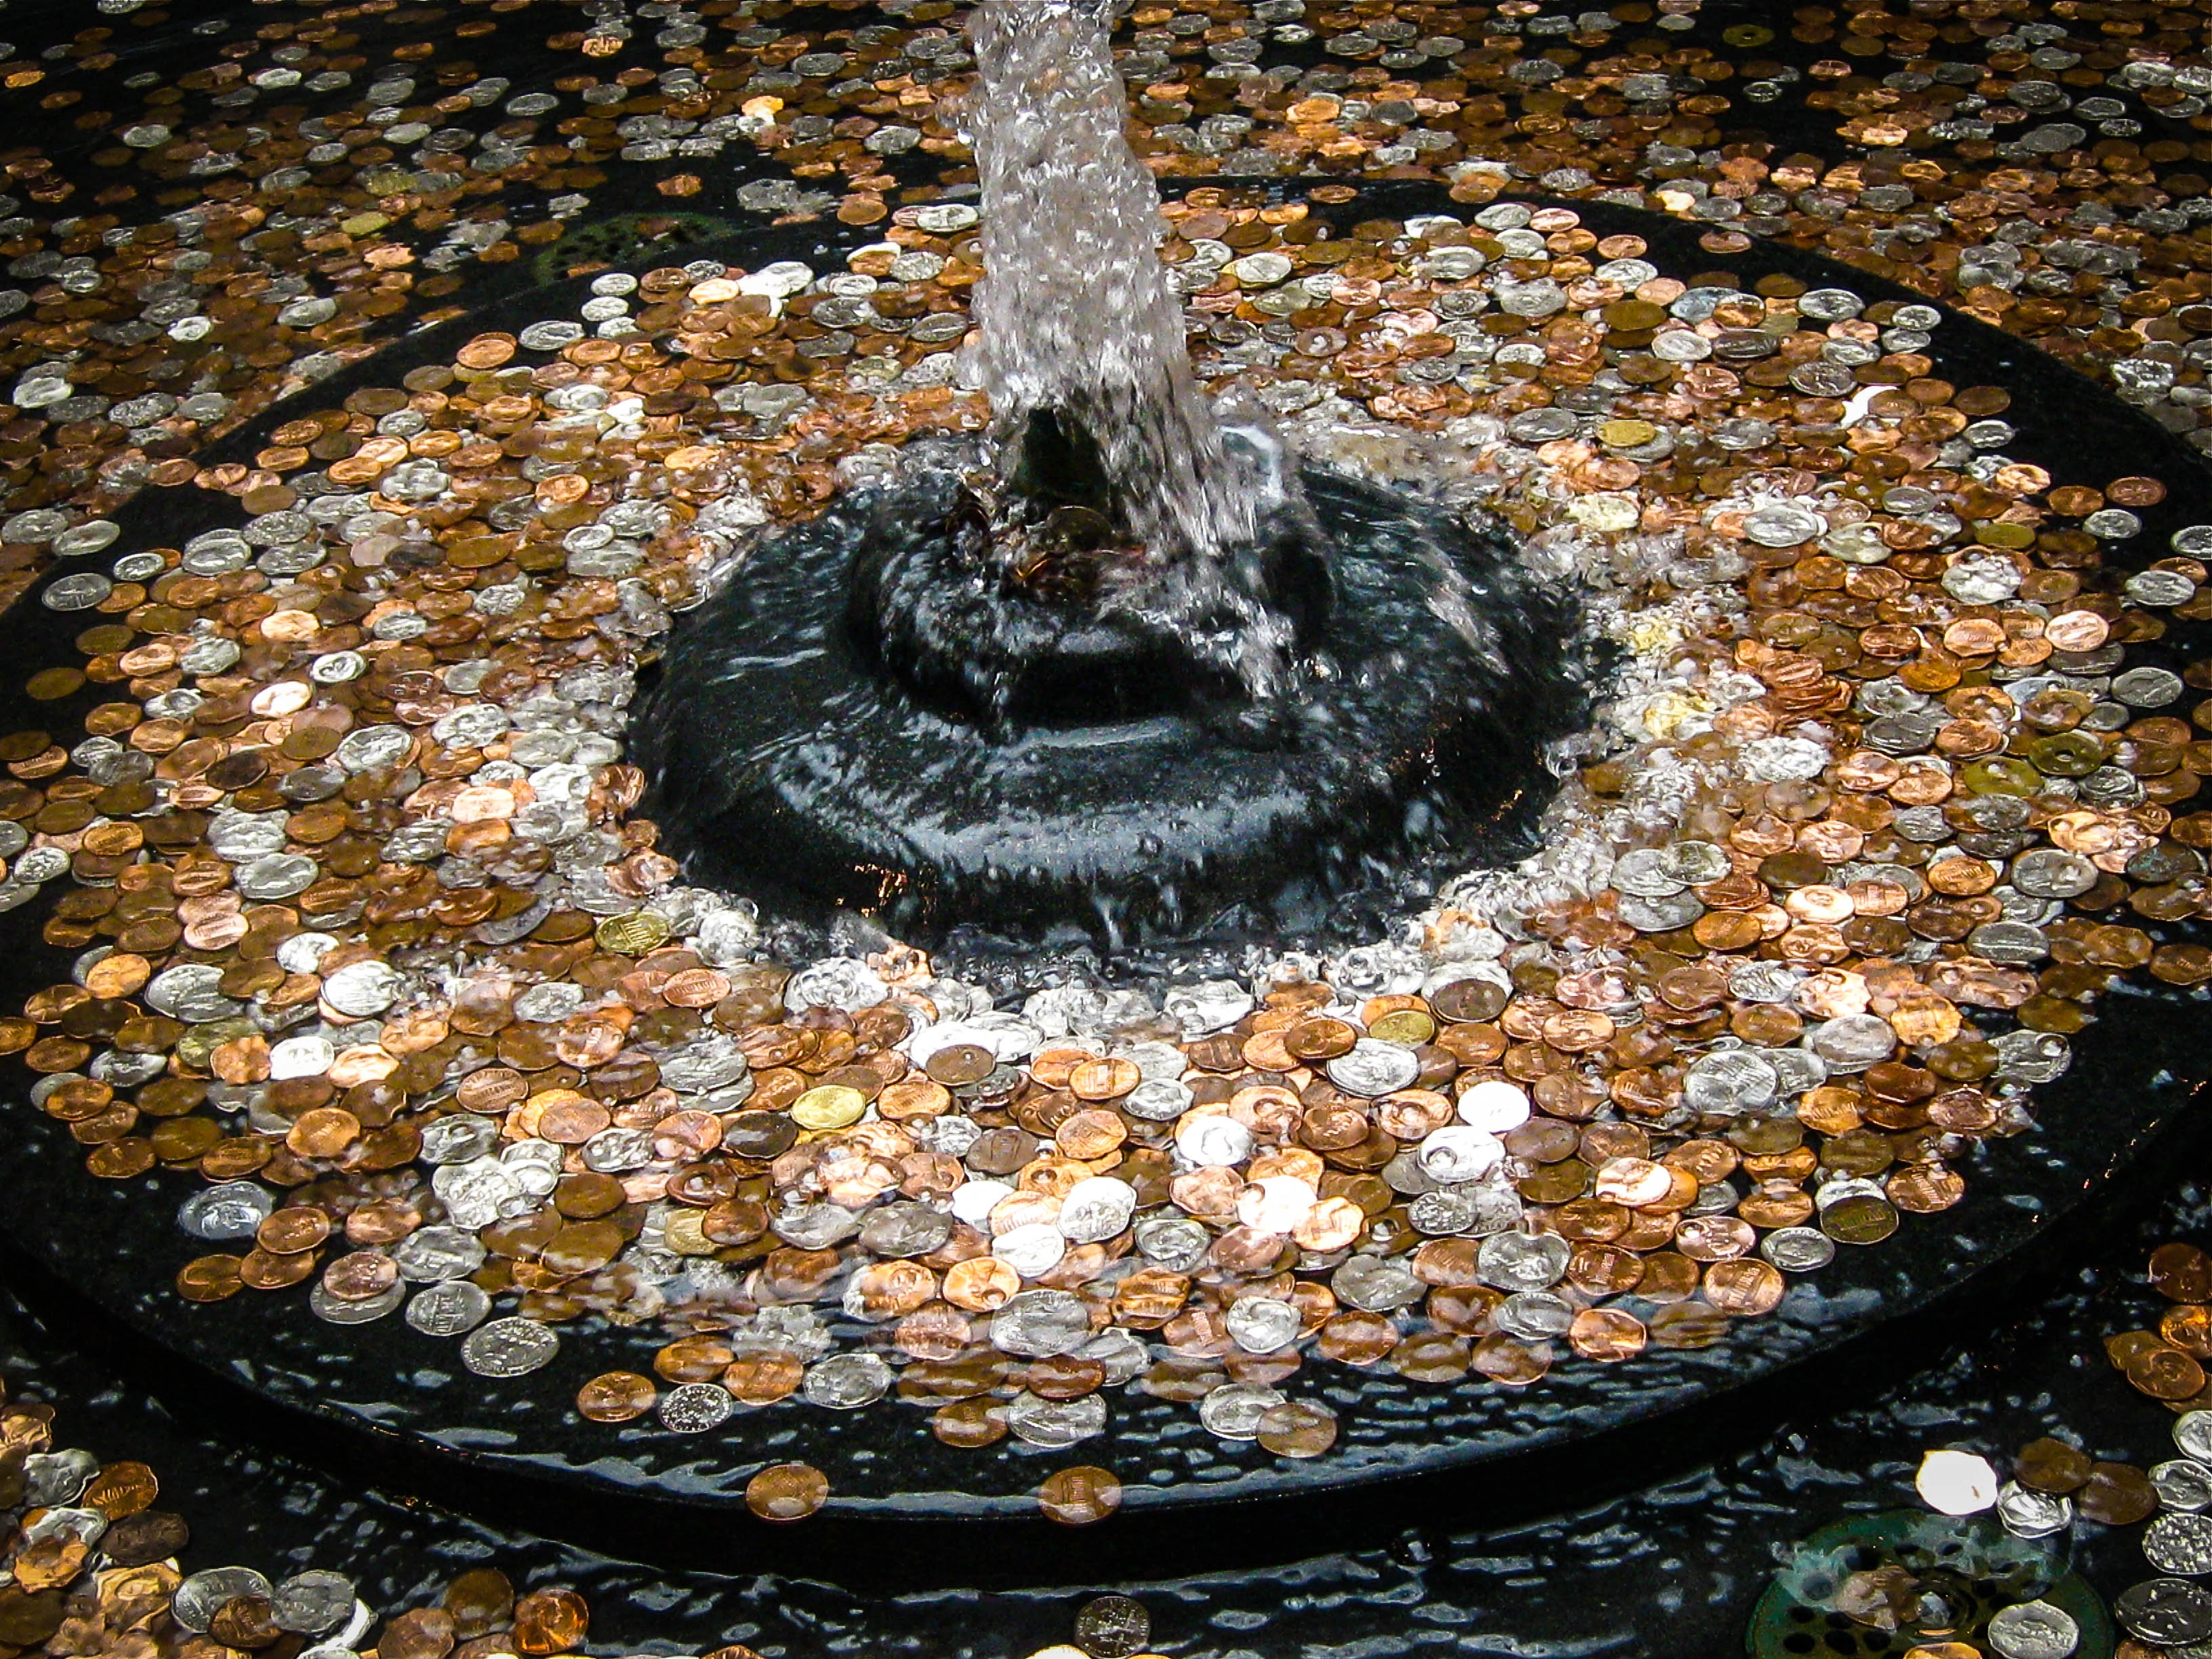 Why Do We Throw Coins into Fountains?